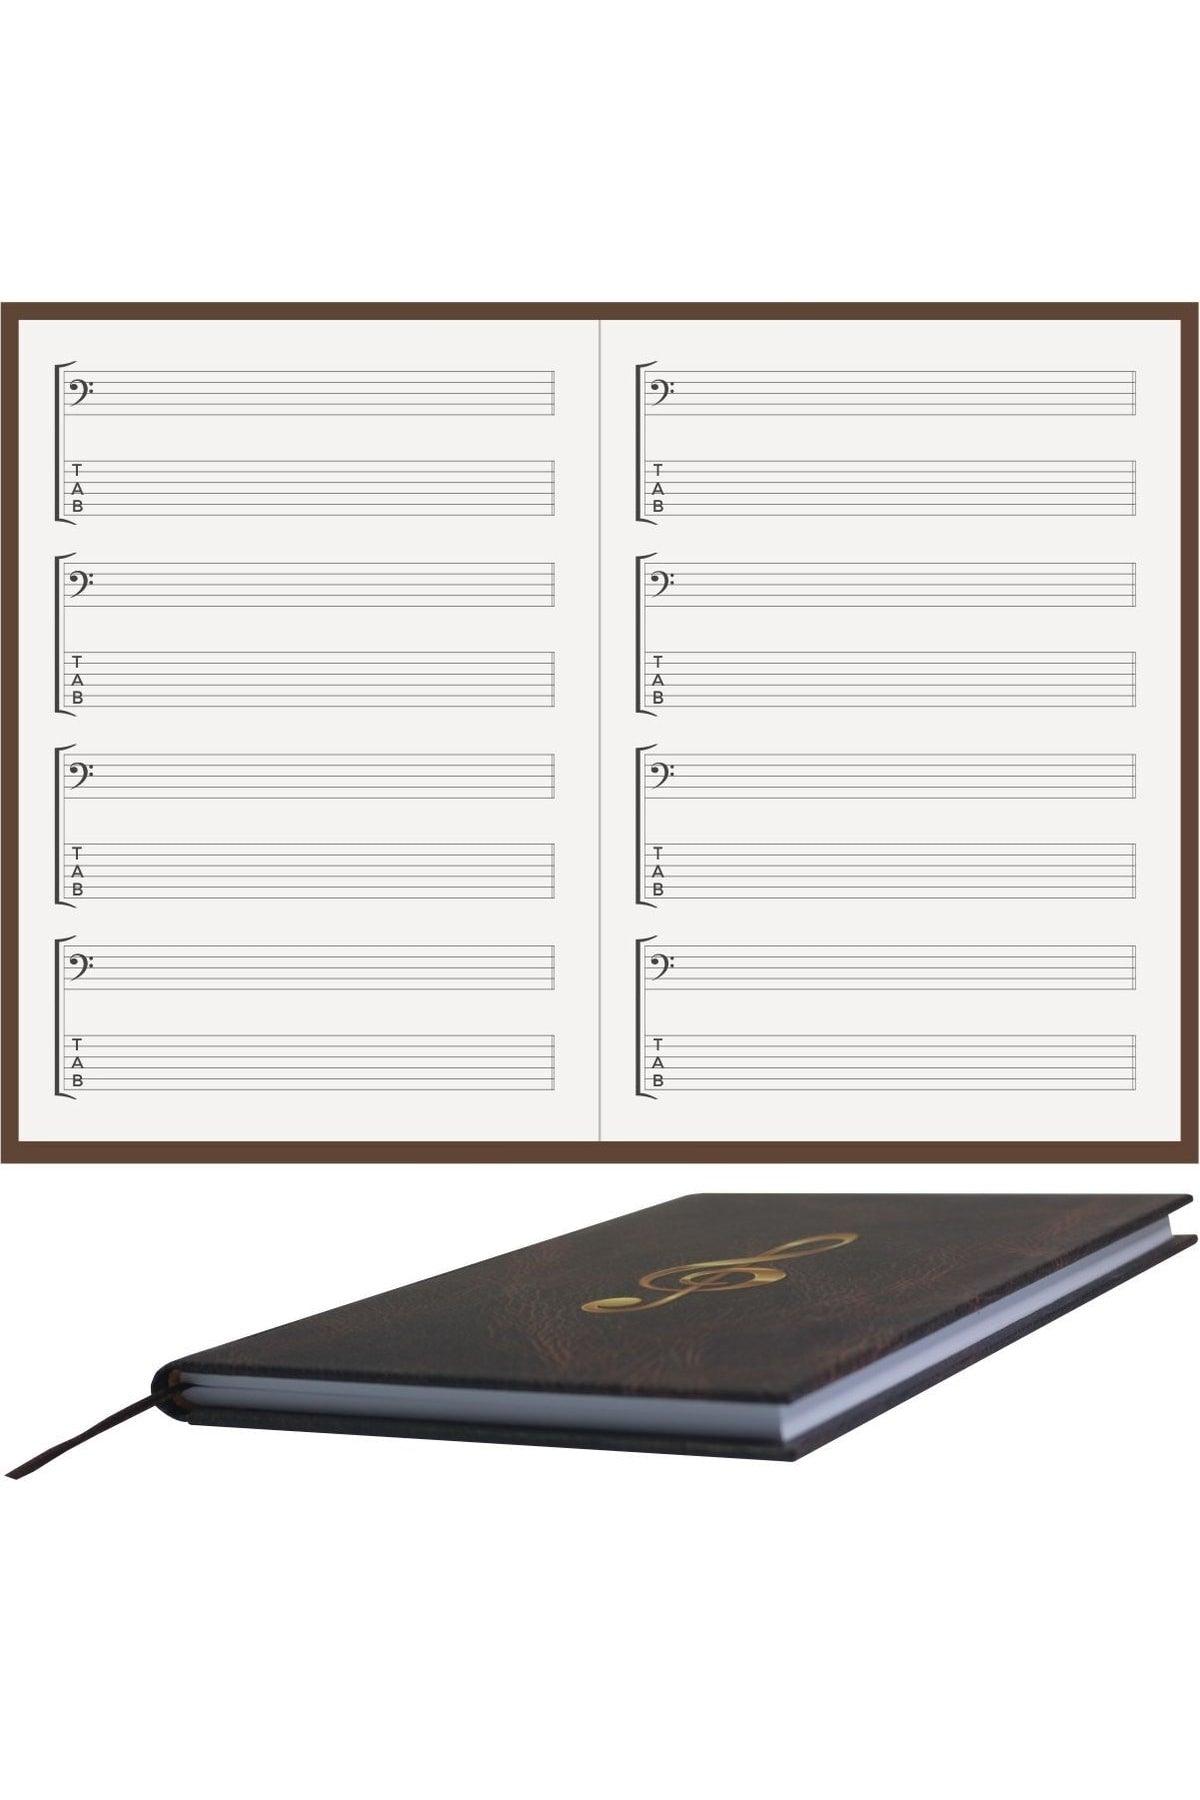 Guitar Notebook (With Fa And Tab Keys) -